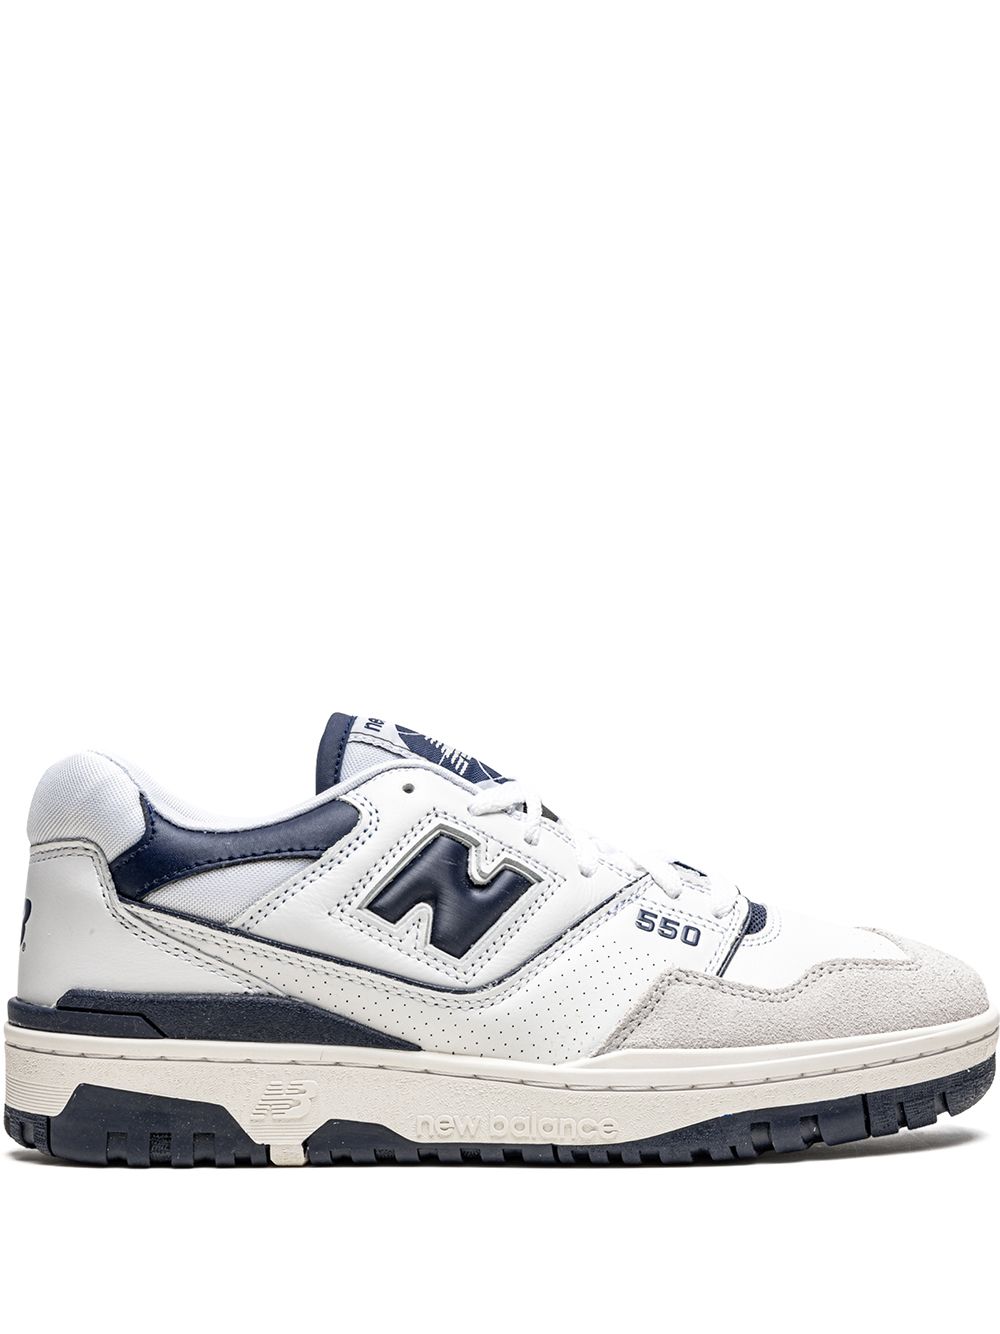 New Balance 550 "White/Navy Blue" sneakers